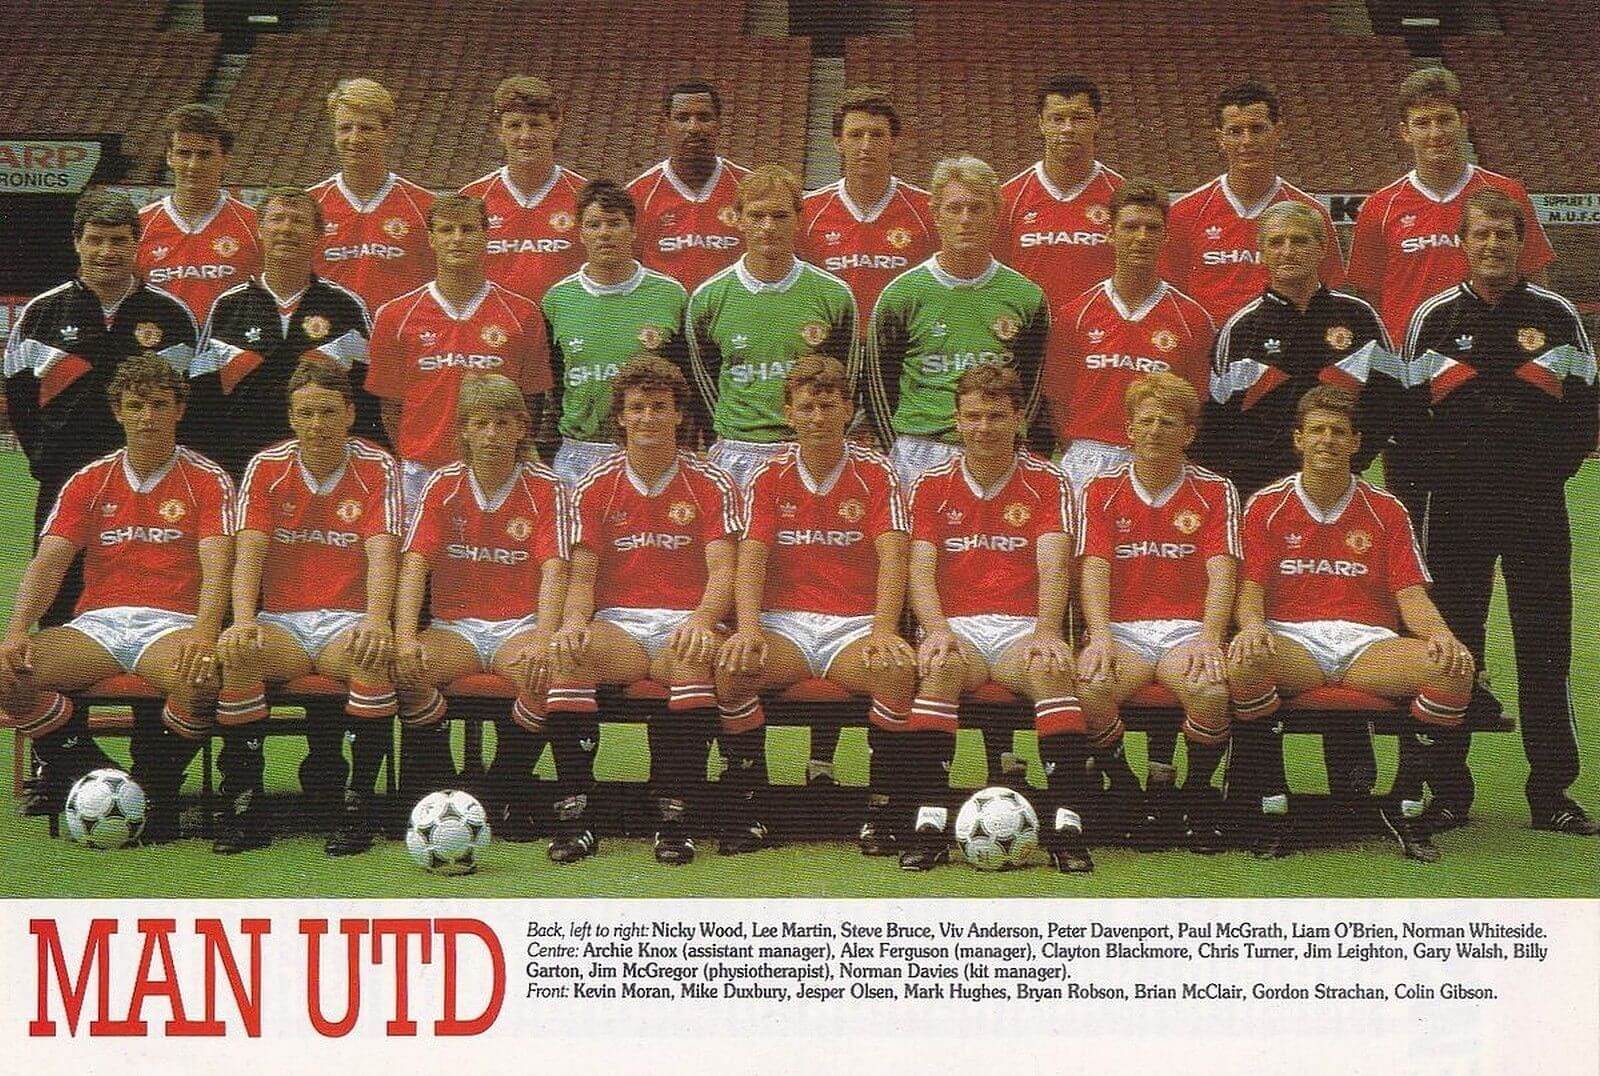 1988 Manchester United